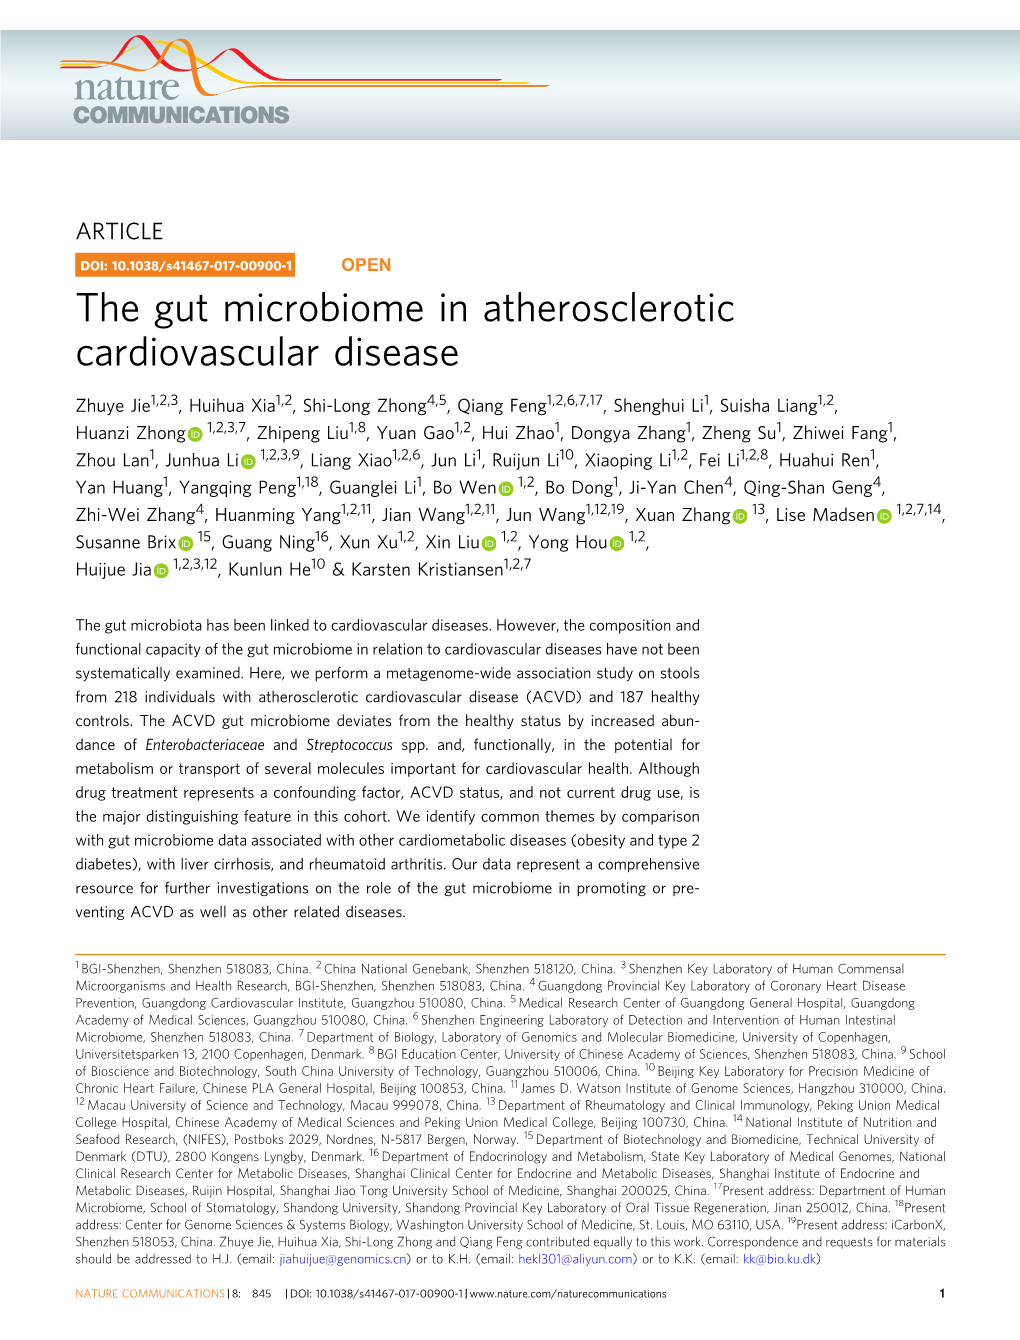 The Gut Microbiome in Atherosclerotic Cardiovascular Disease